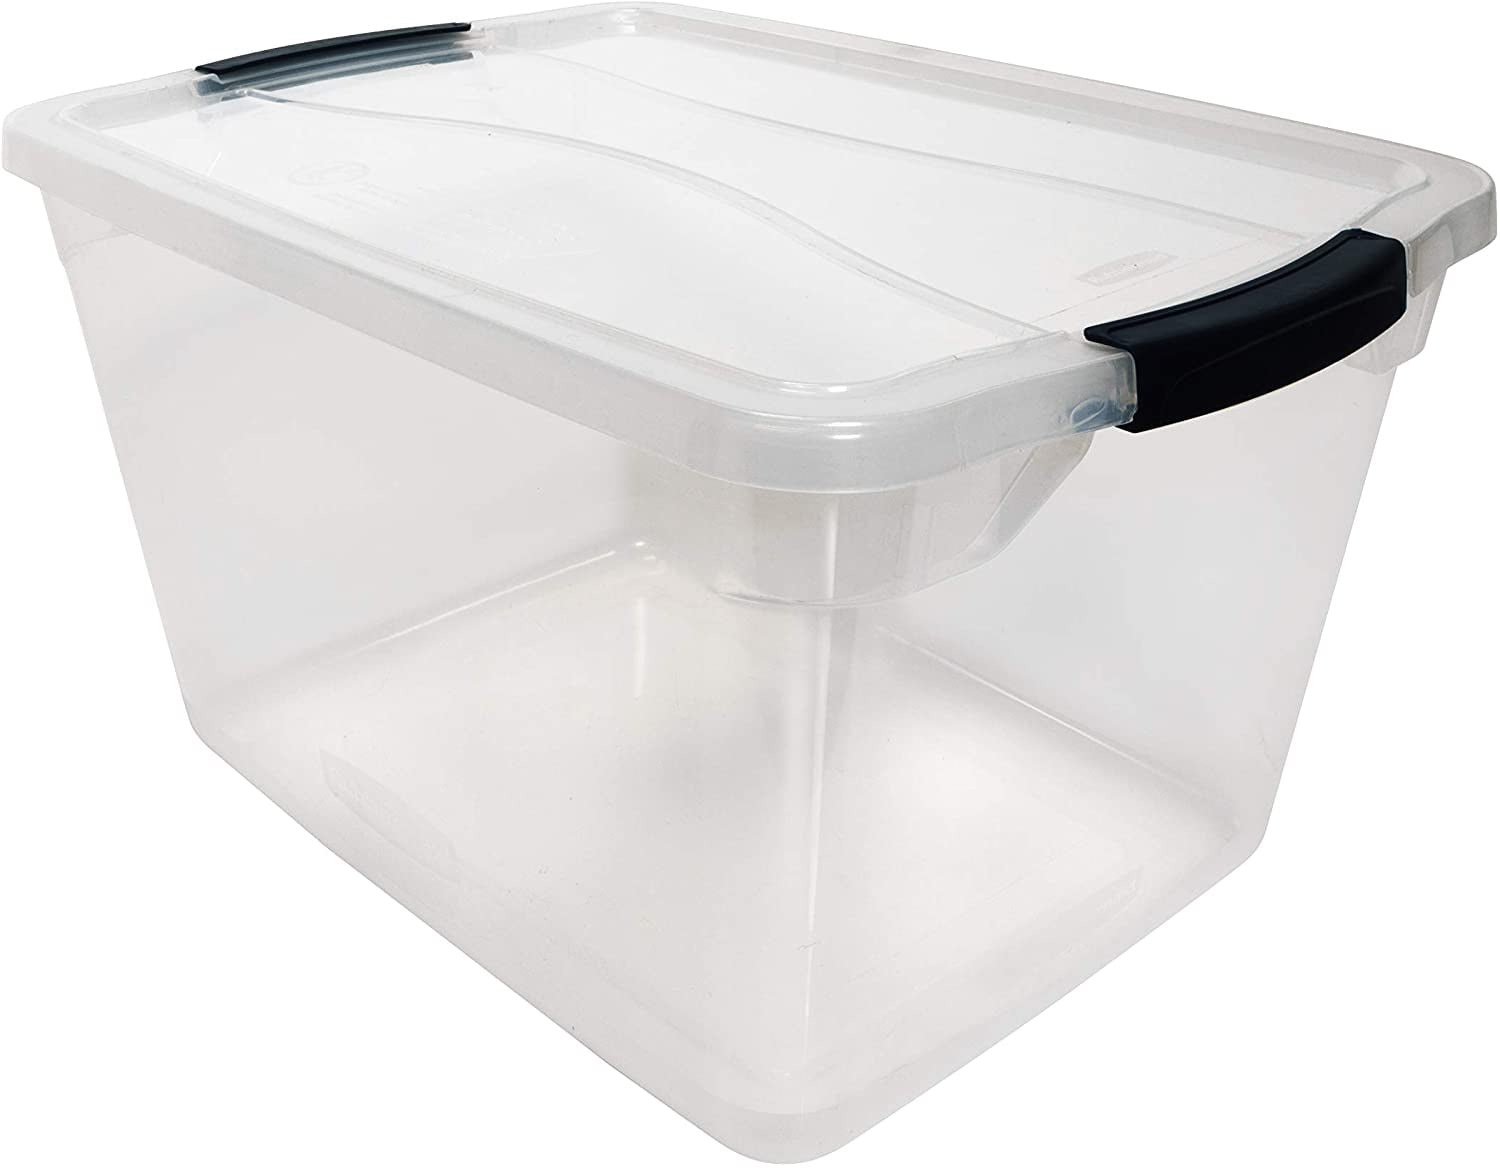 Stackable Plastic Storage Containers, Rubbermaid Stackable Shelves